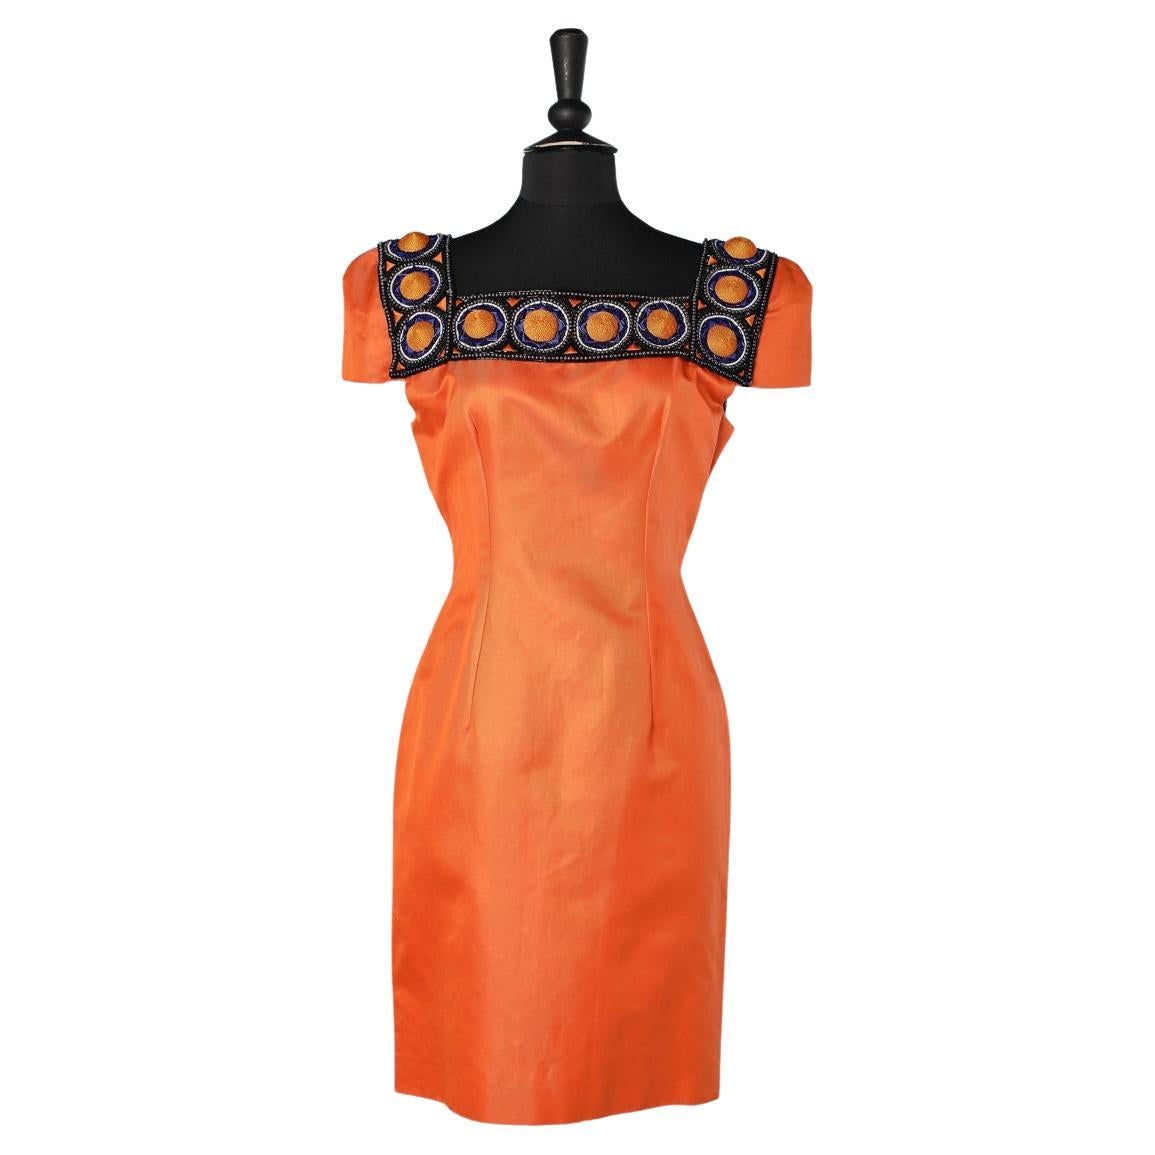 Orange cocktail dress with beads and threads embroideries Gai Mattiolo Couture 